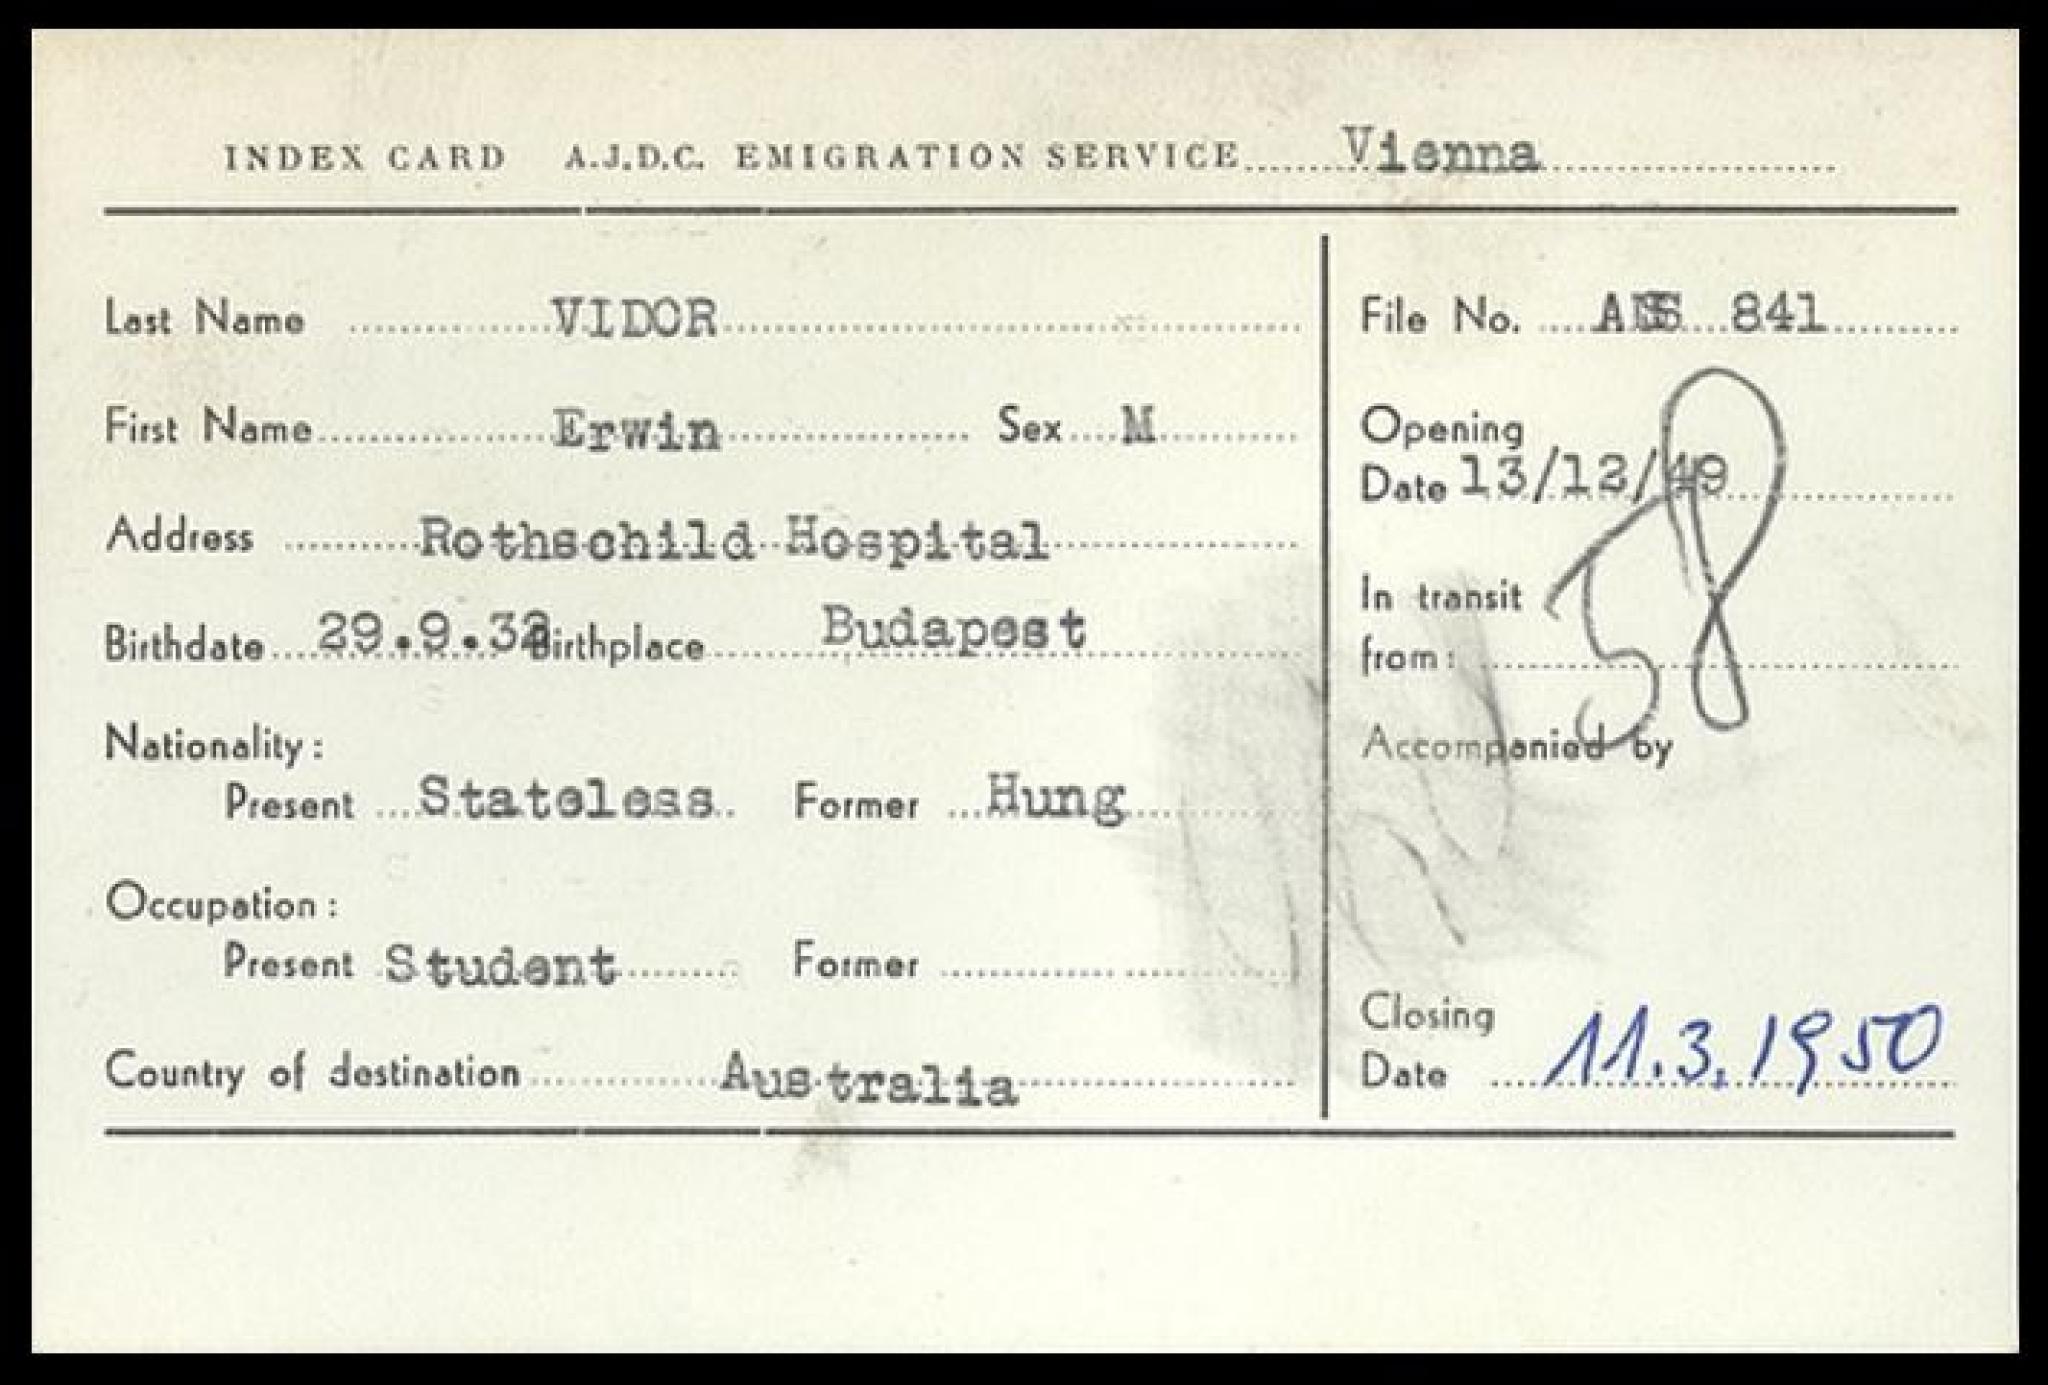 Public domain image of American Jewish Joint Distribution Committee (JDC) index card for a stateless person destined for Australia following the Second World War from https://commons.wikimedia.org/wiki/File:DP-Vienna.jpg.